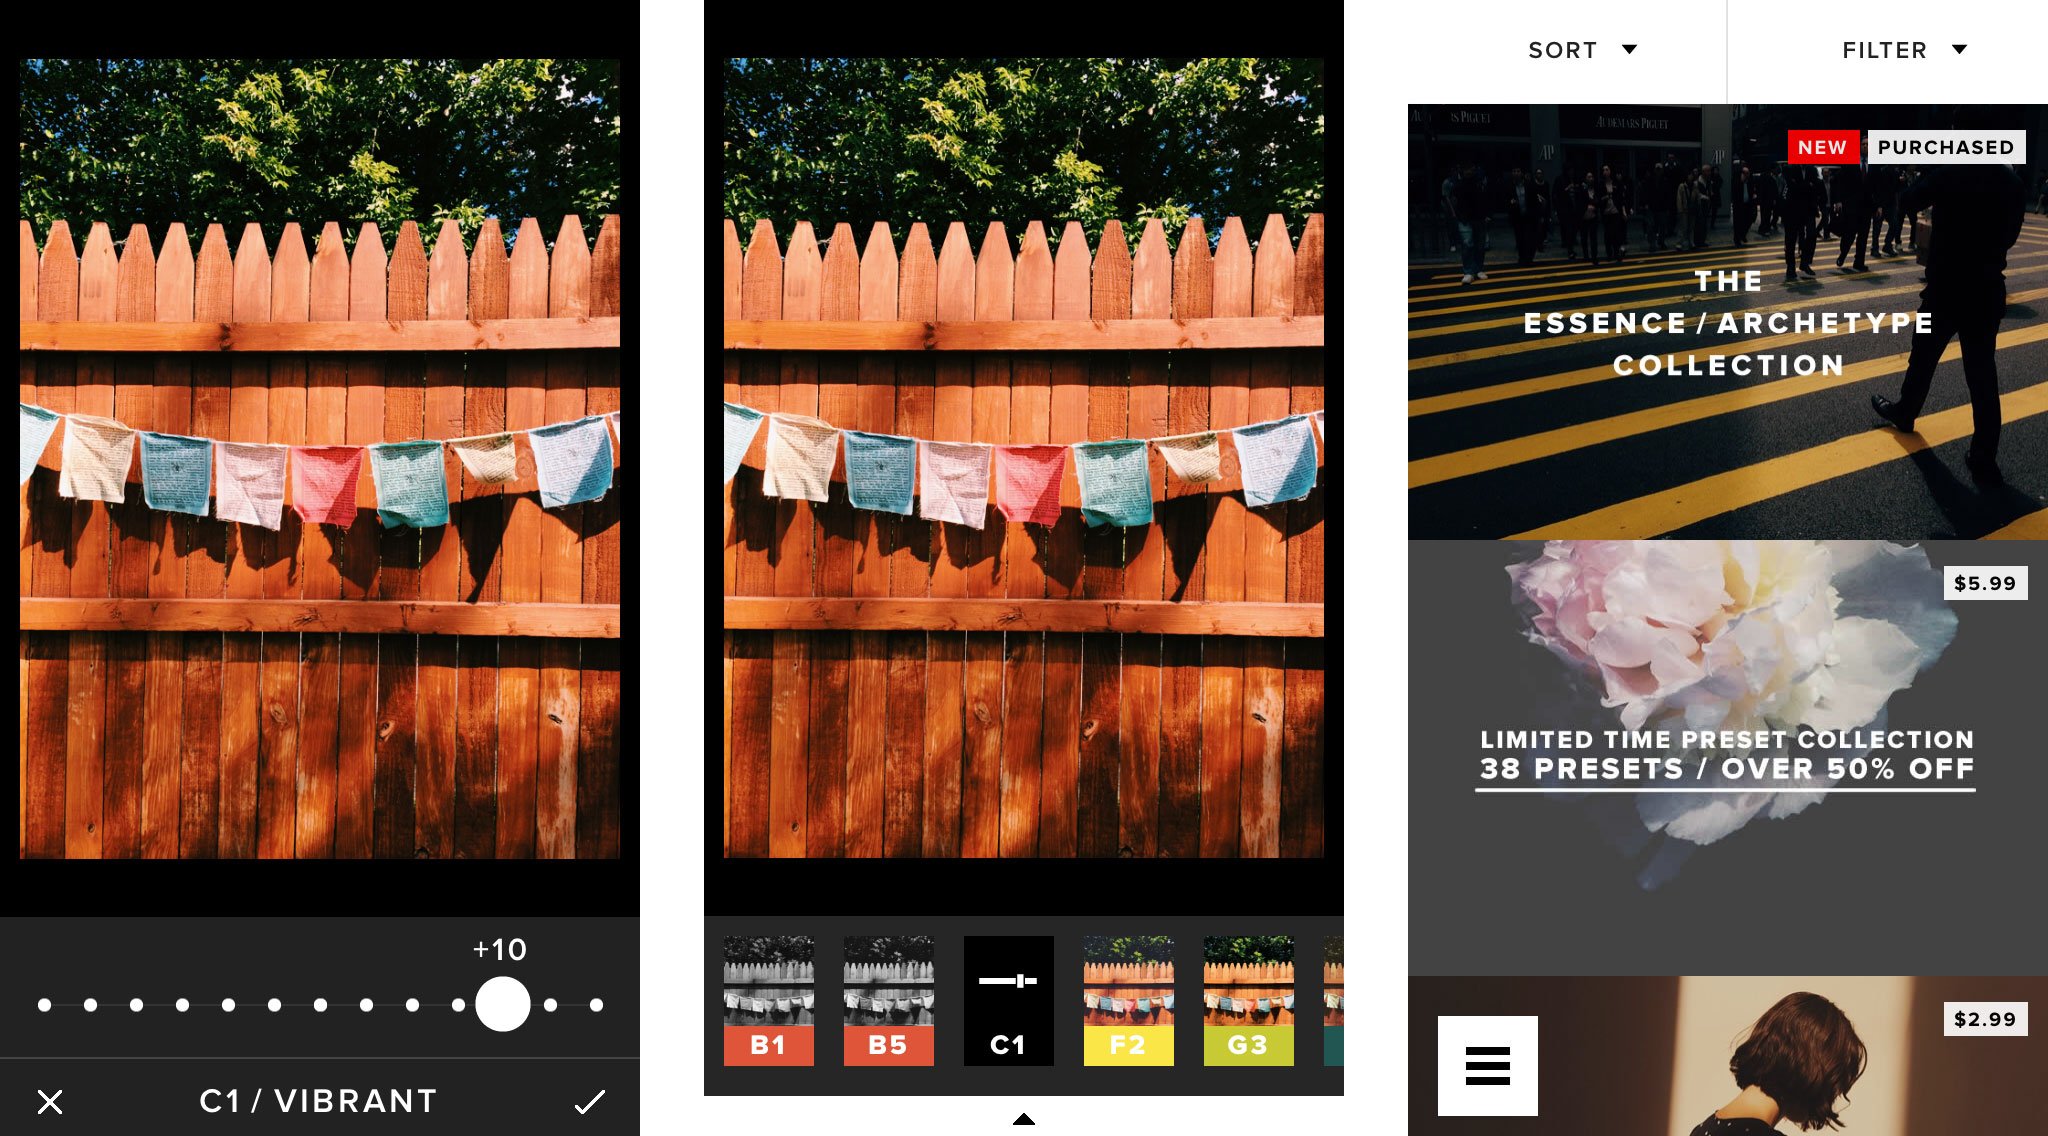 Best photo filter and effects apps for iPhone: VSCO Cam